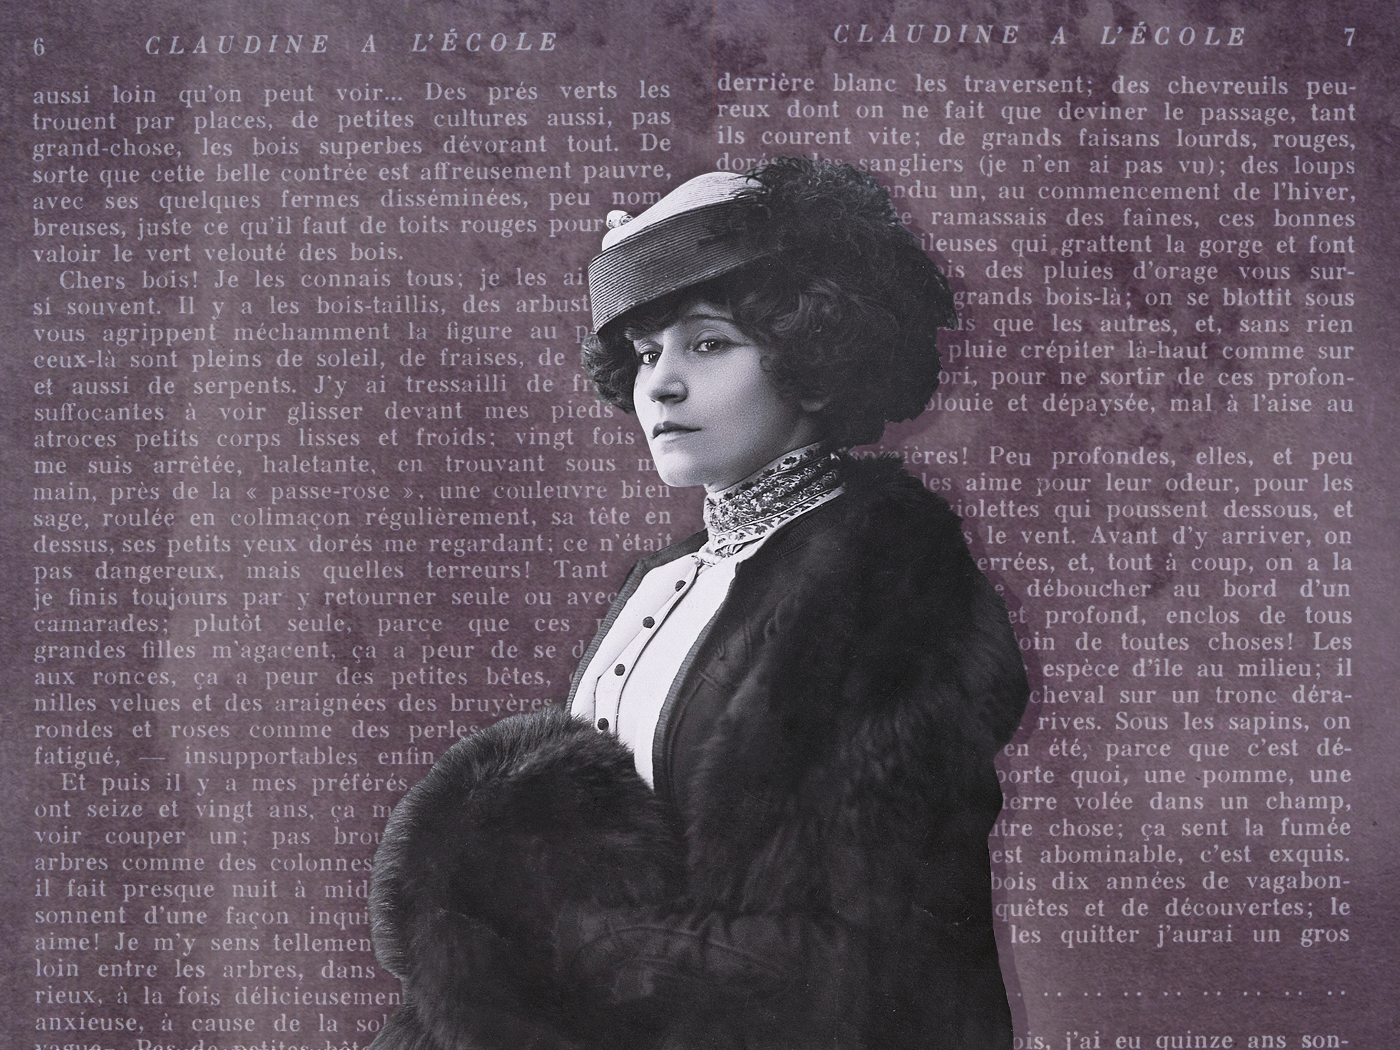 Illustration of the French author Colette